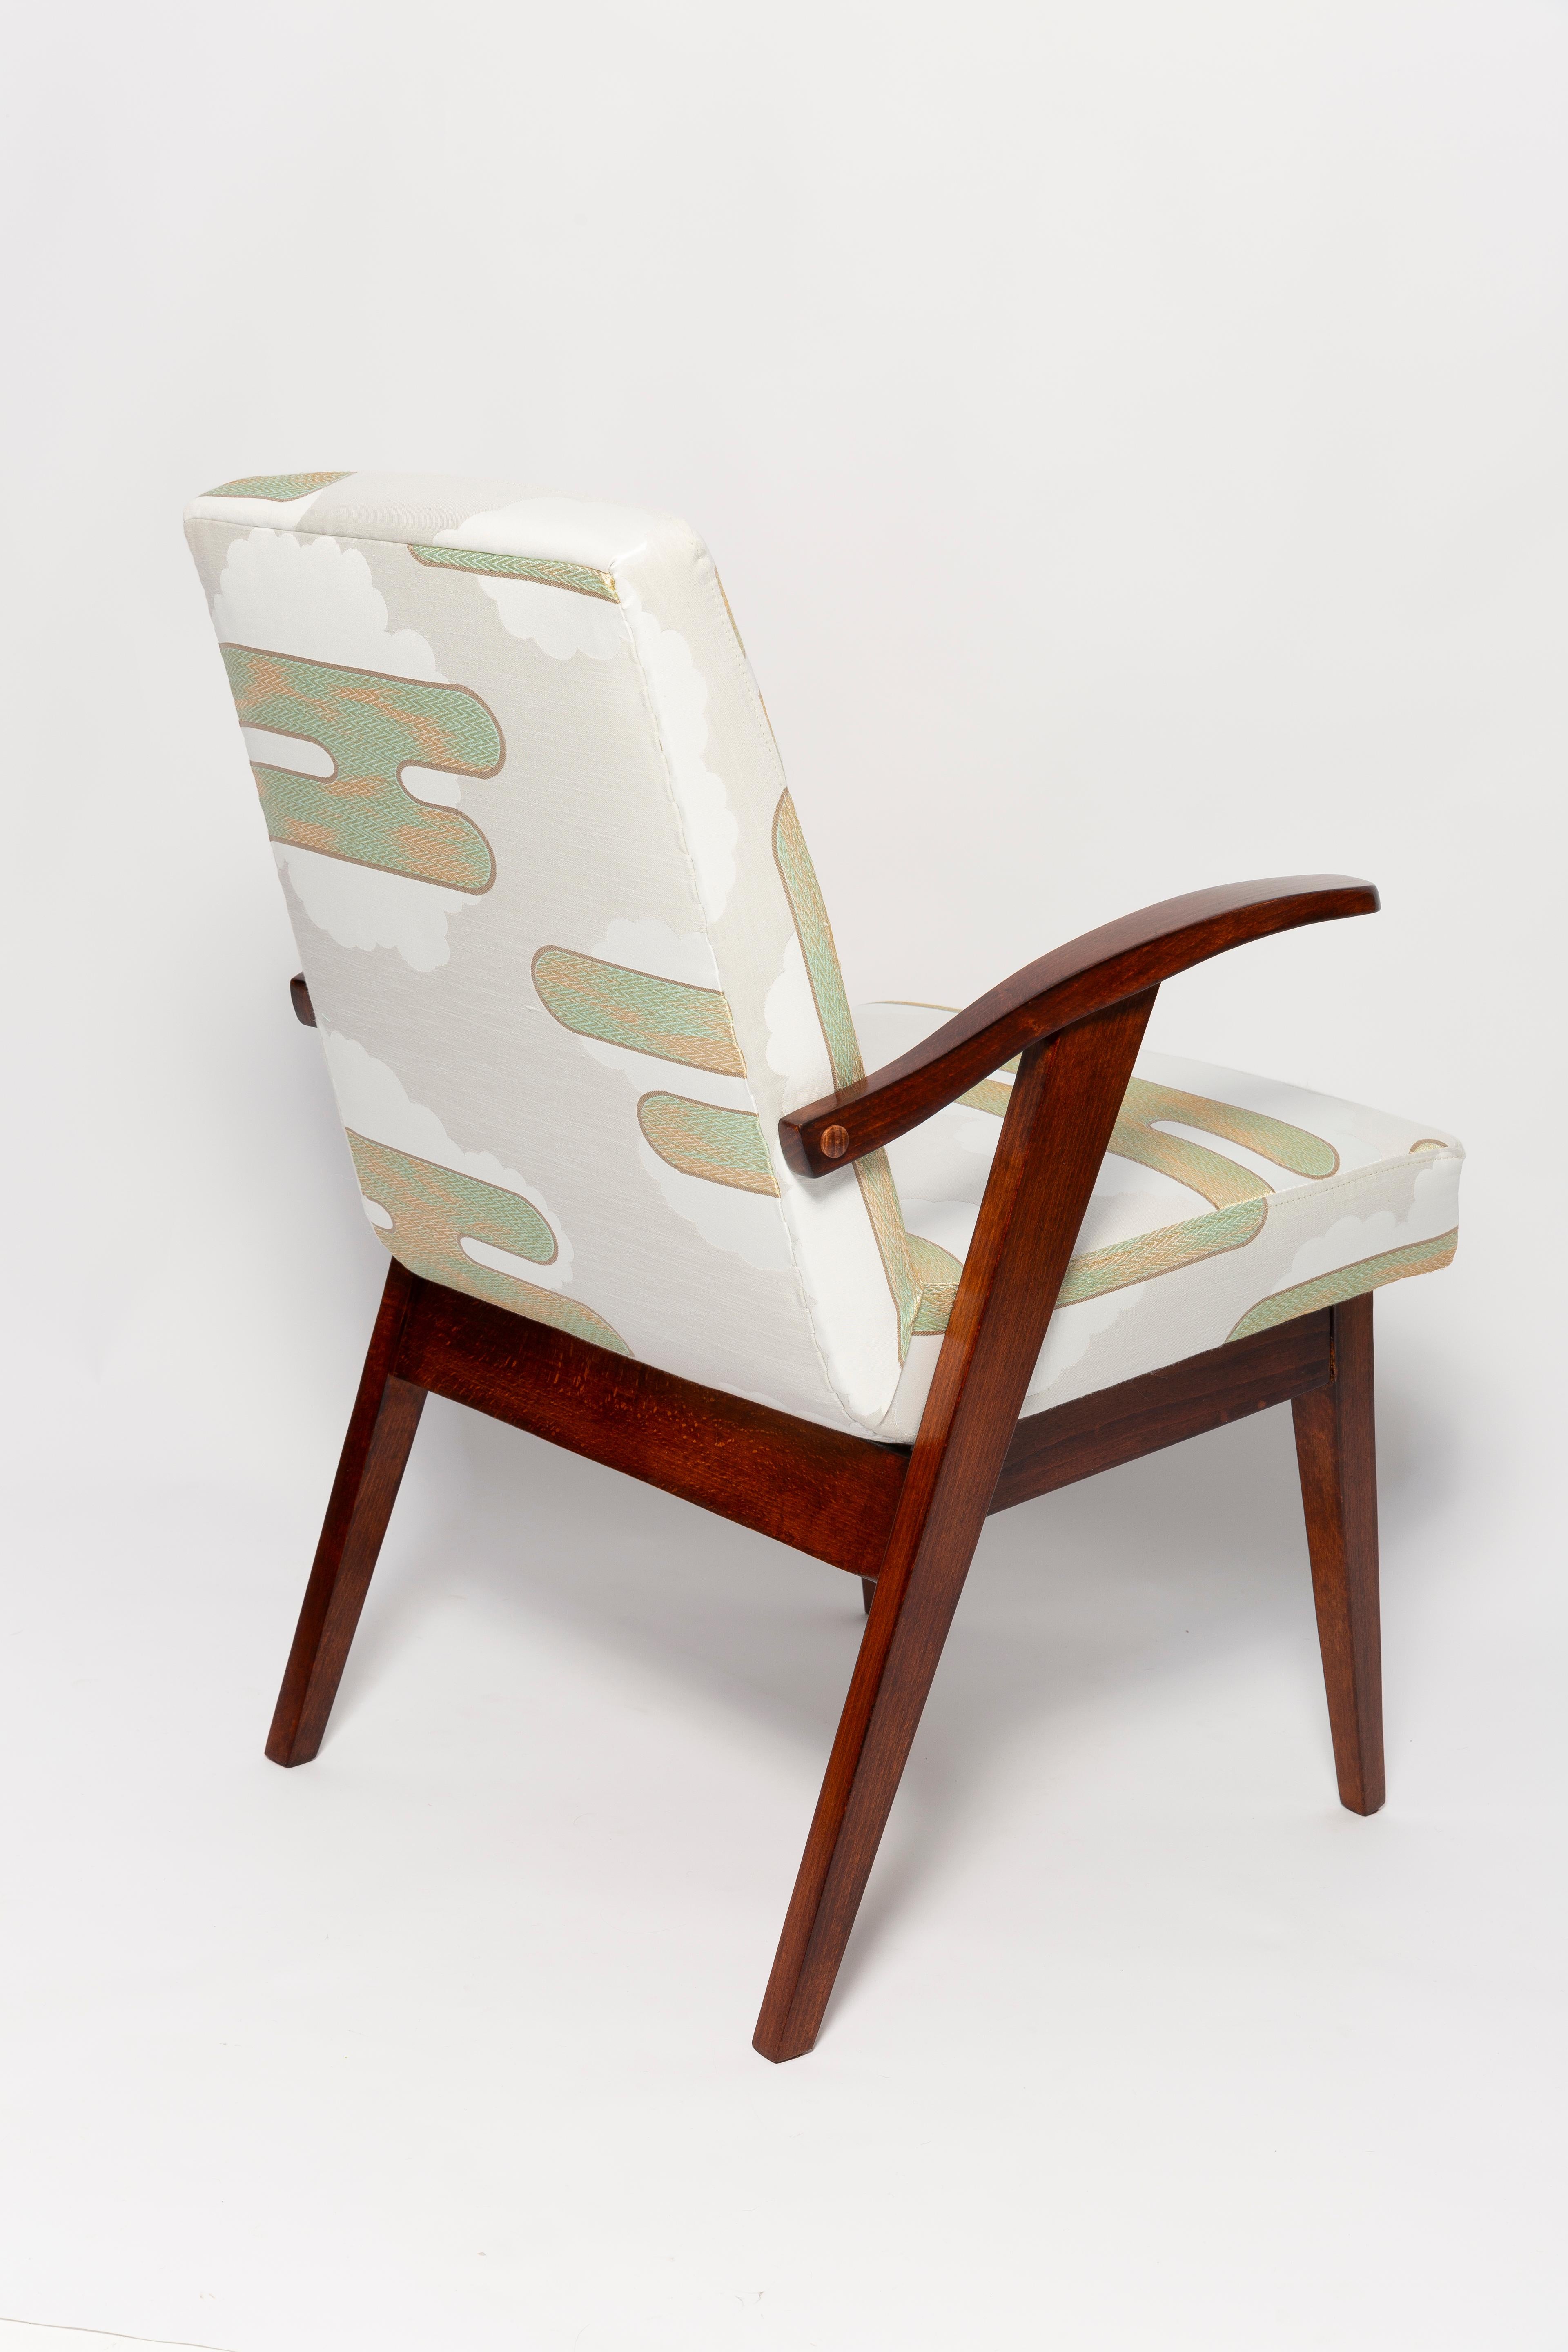 Mid Century Lontano Jacquard Mint Green Armchair by M. Puchala, Europe, 1960s For Sale 3